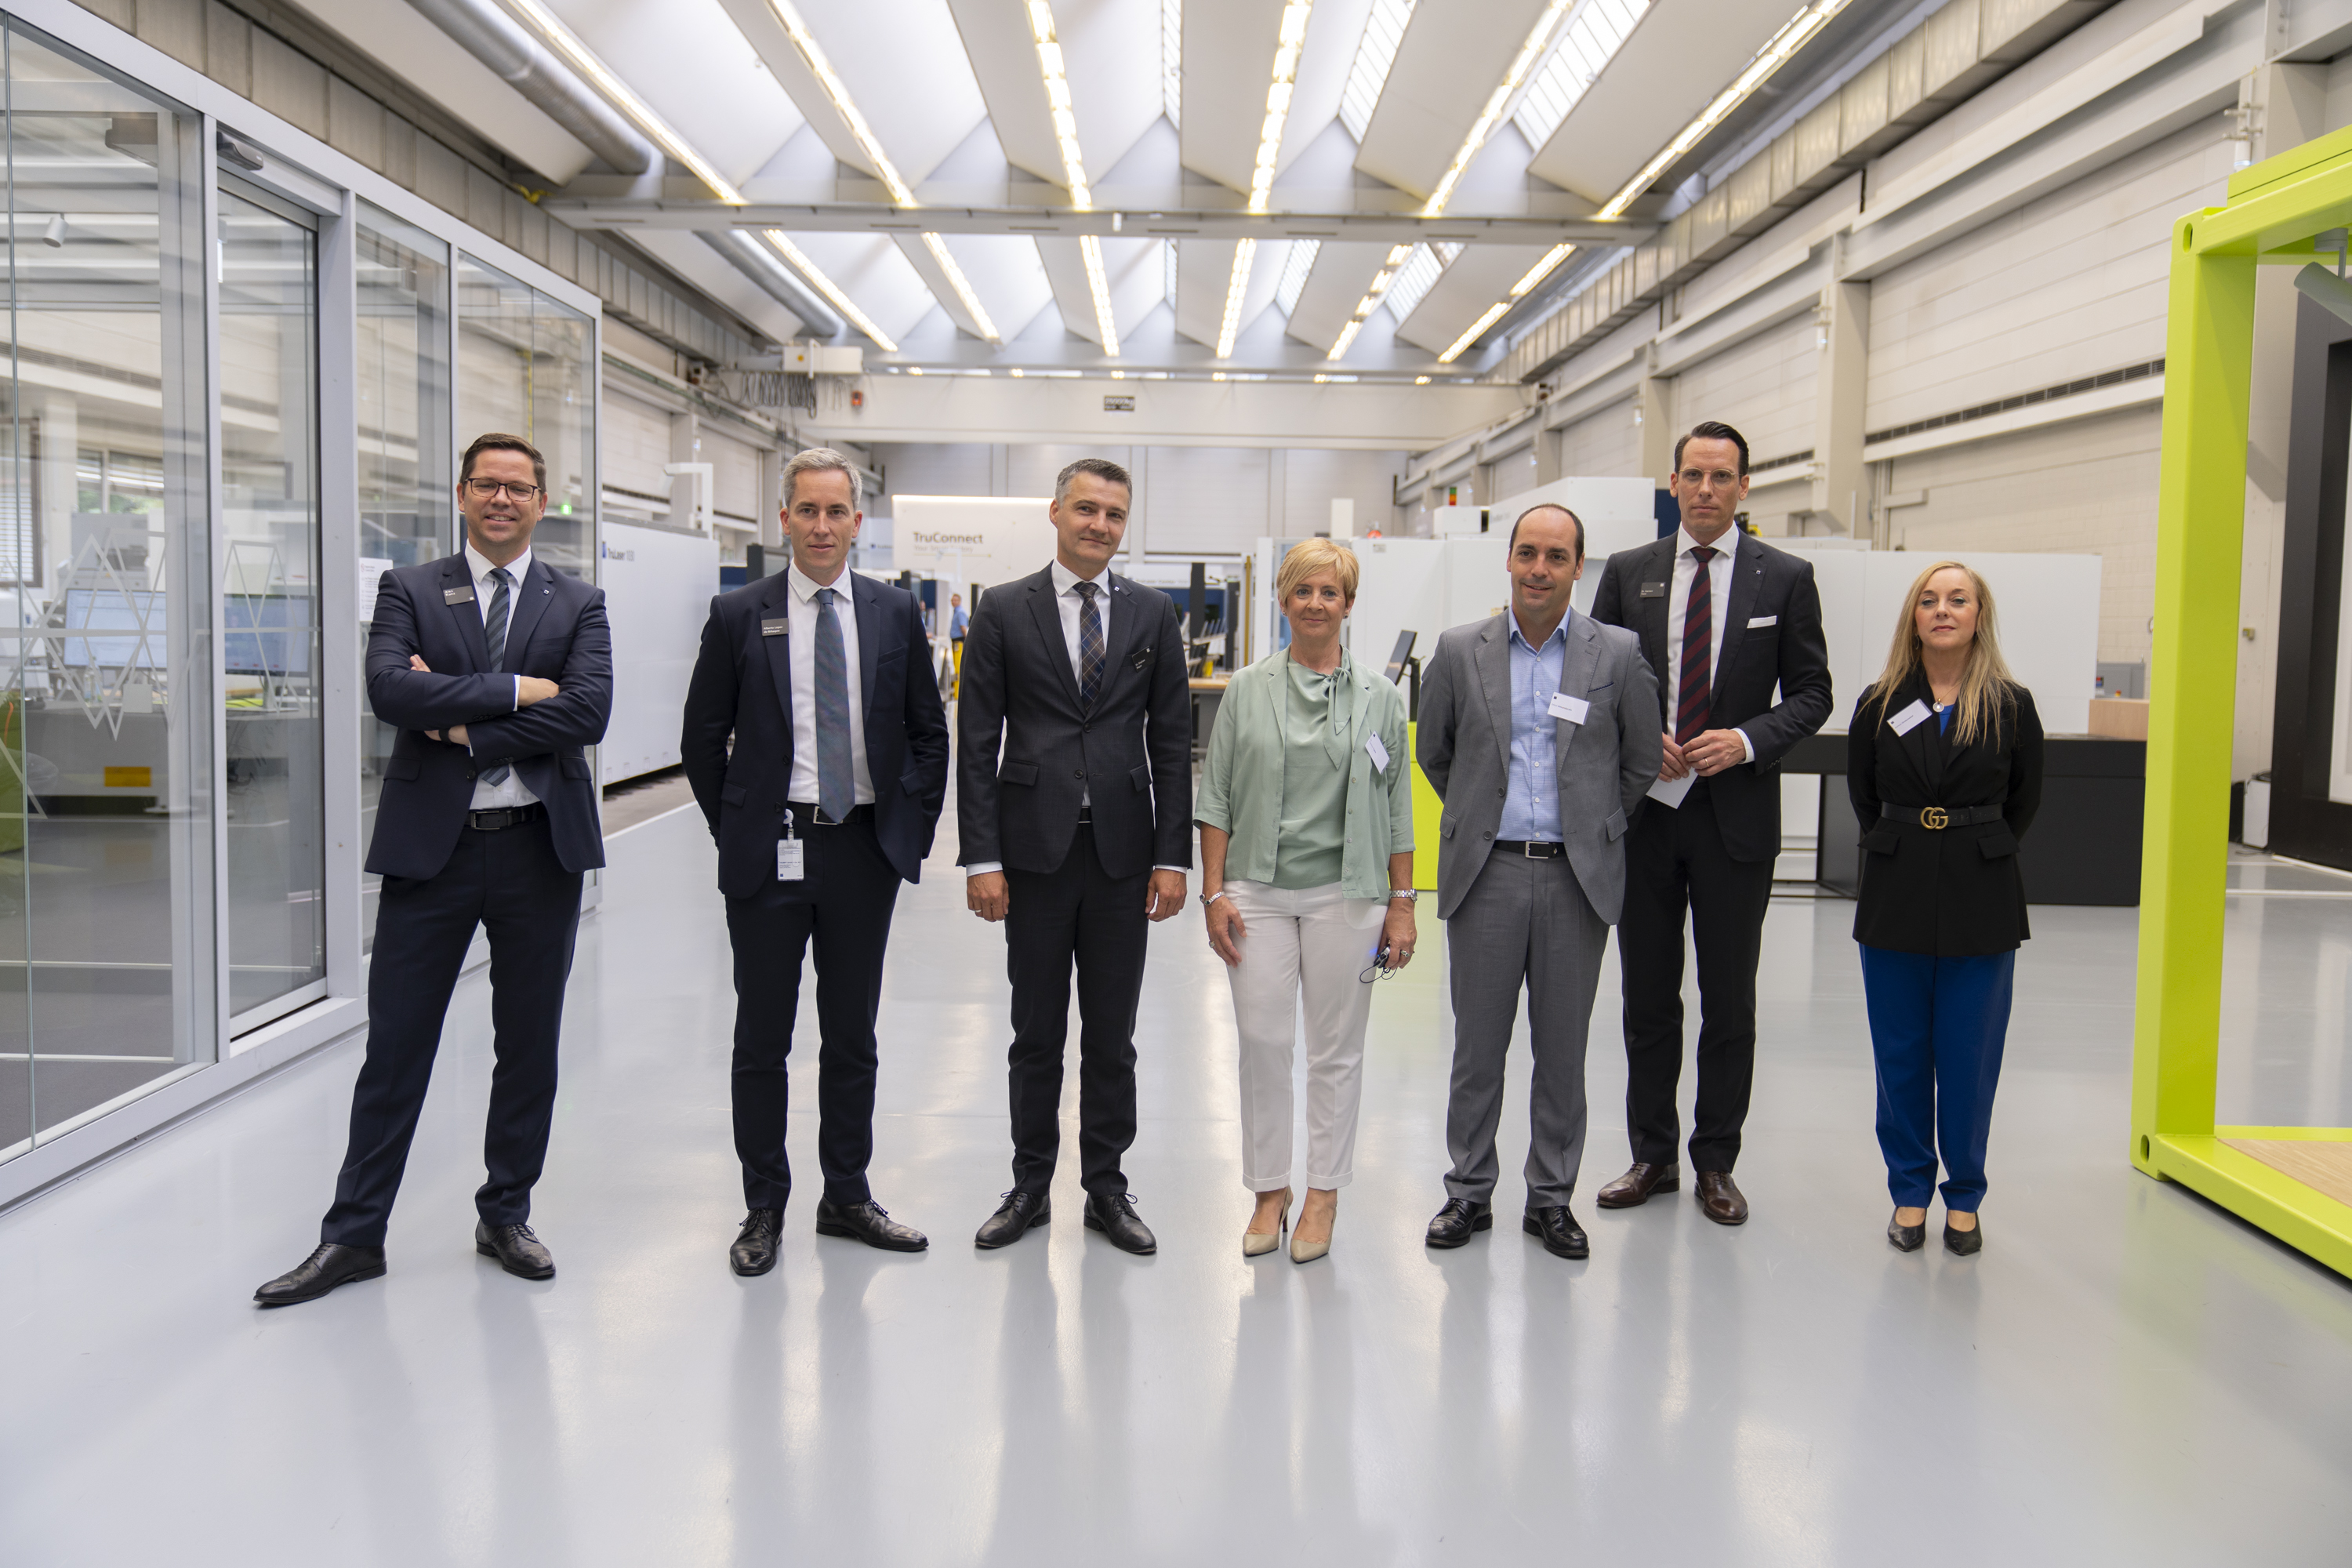 The Minister of Economic Development, Sustainability and Environment of the Basque Government visits the TRUMPF headquarters in Germany together with Lantek